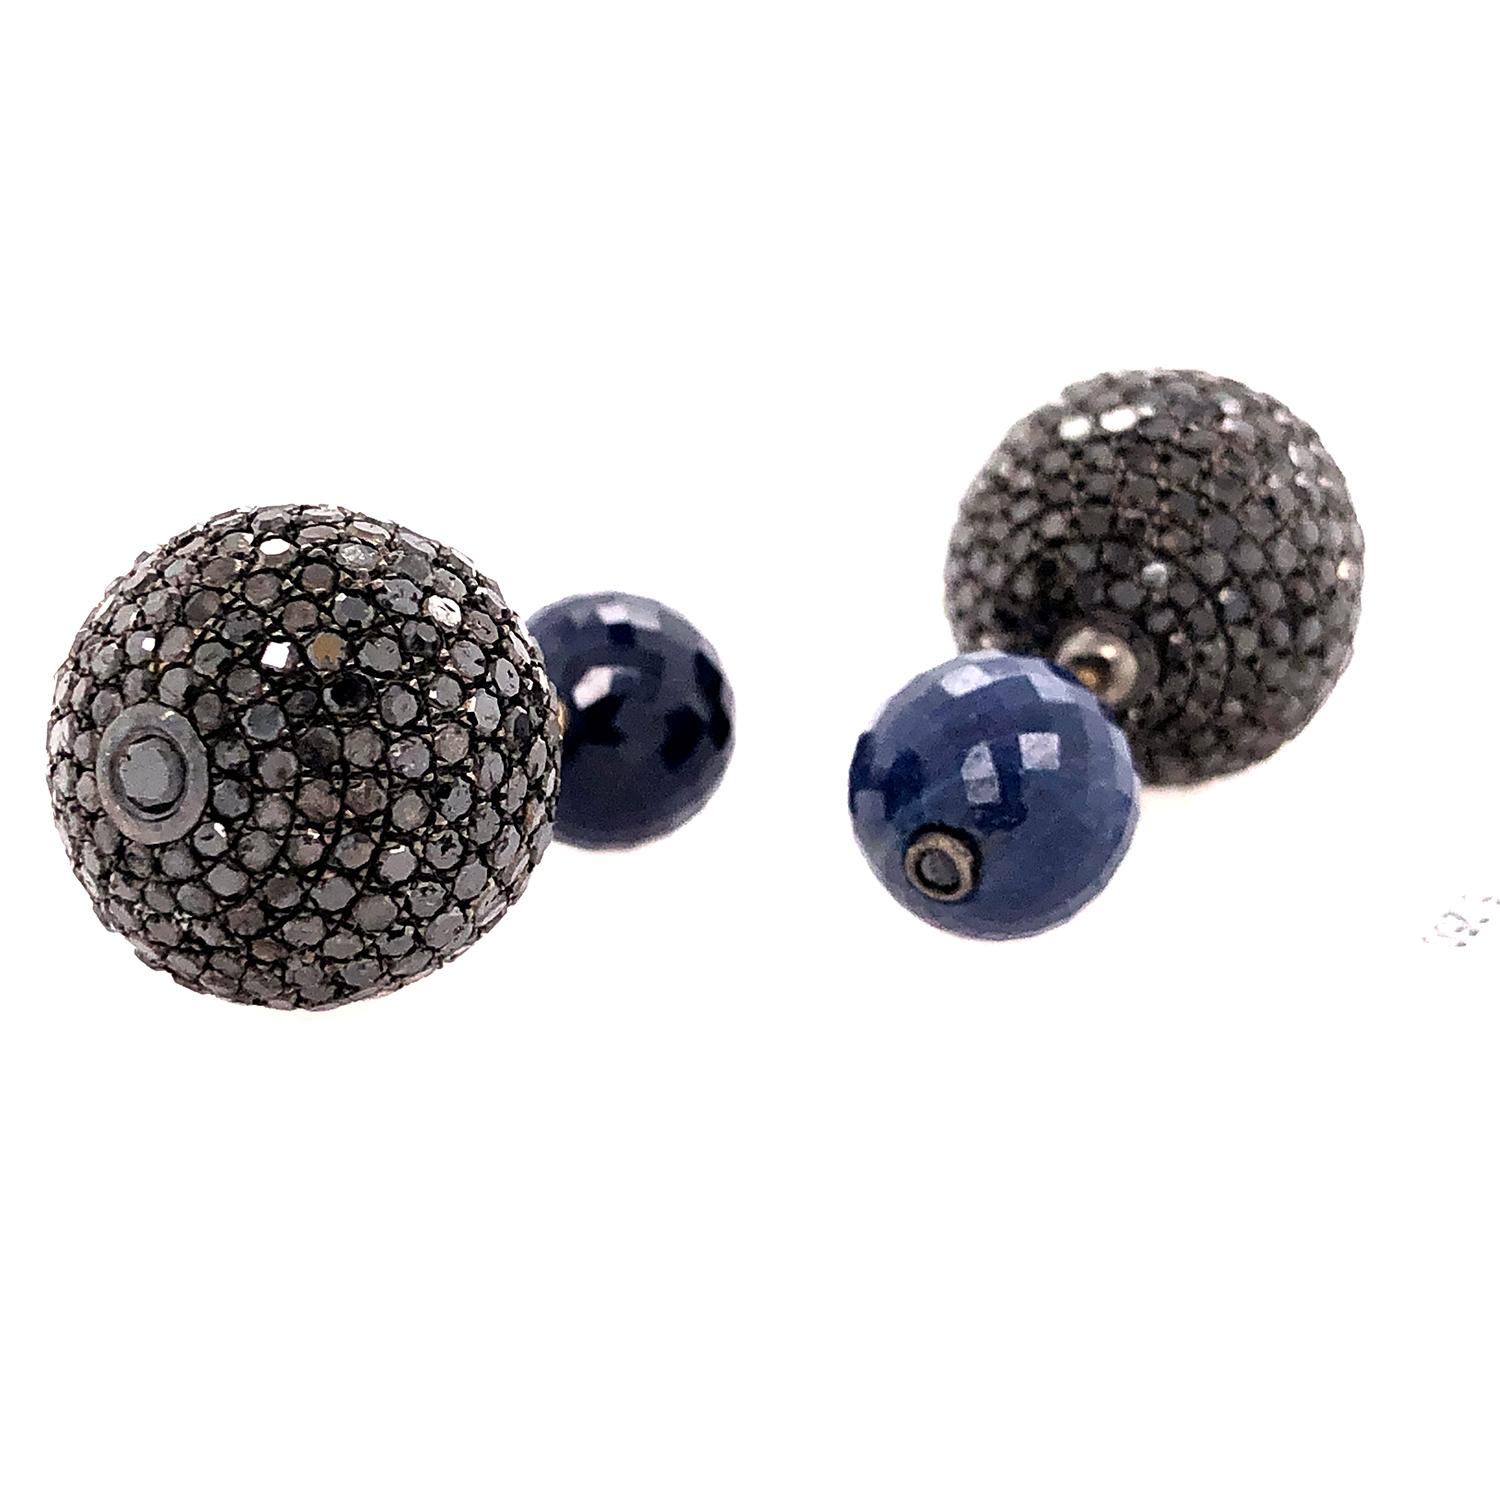 Mixed Cut Sapphire & Pave Diamond Ball Tunnel Earrings Made in 14k Gold & Silver For Sale